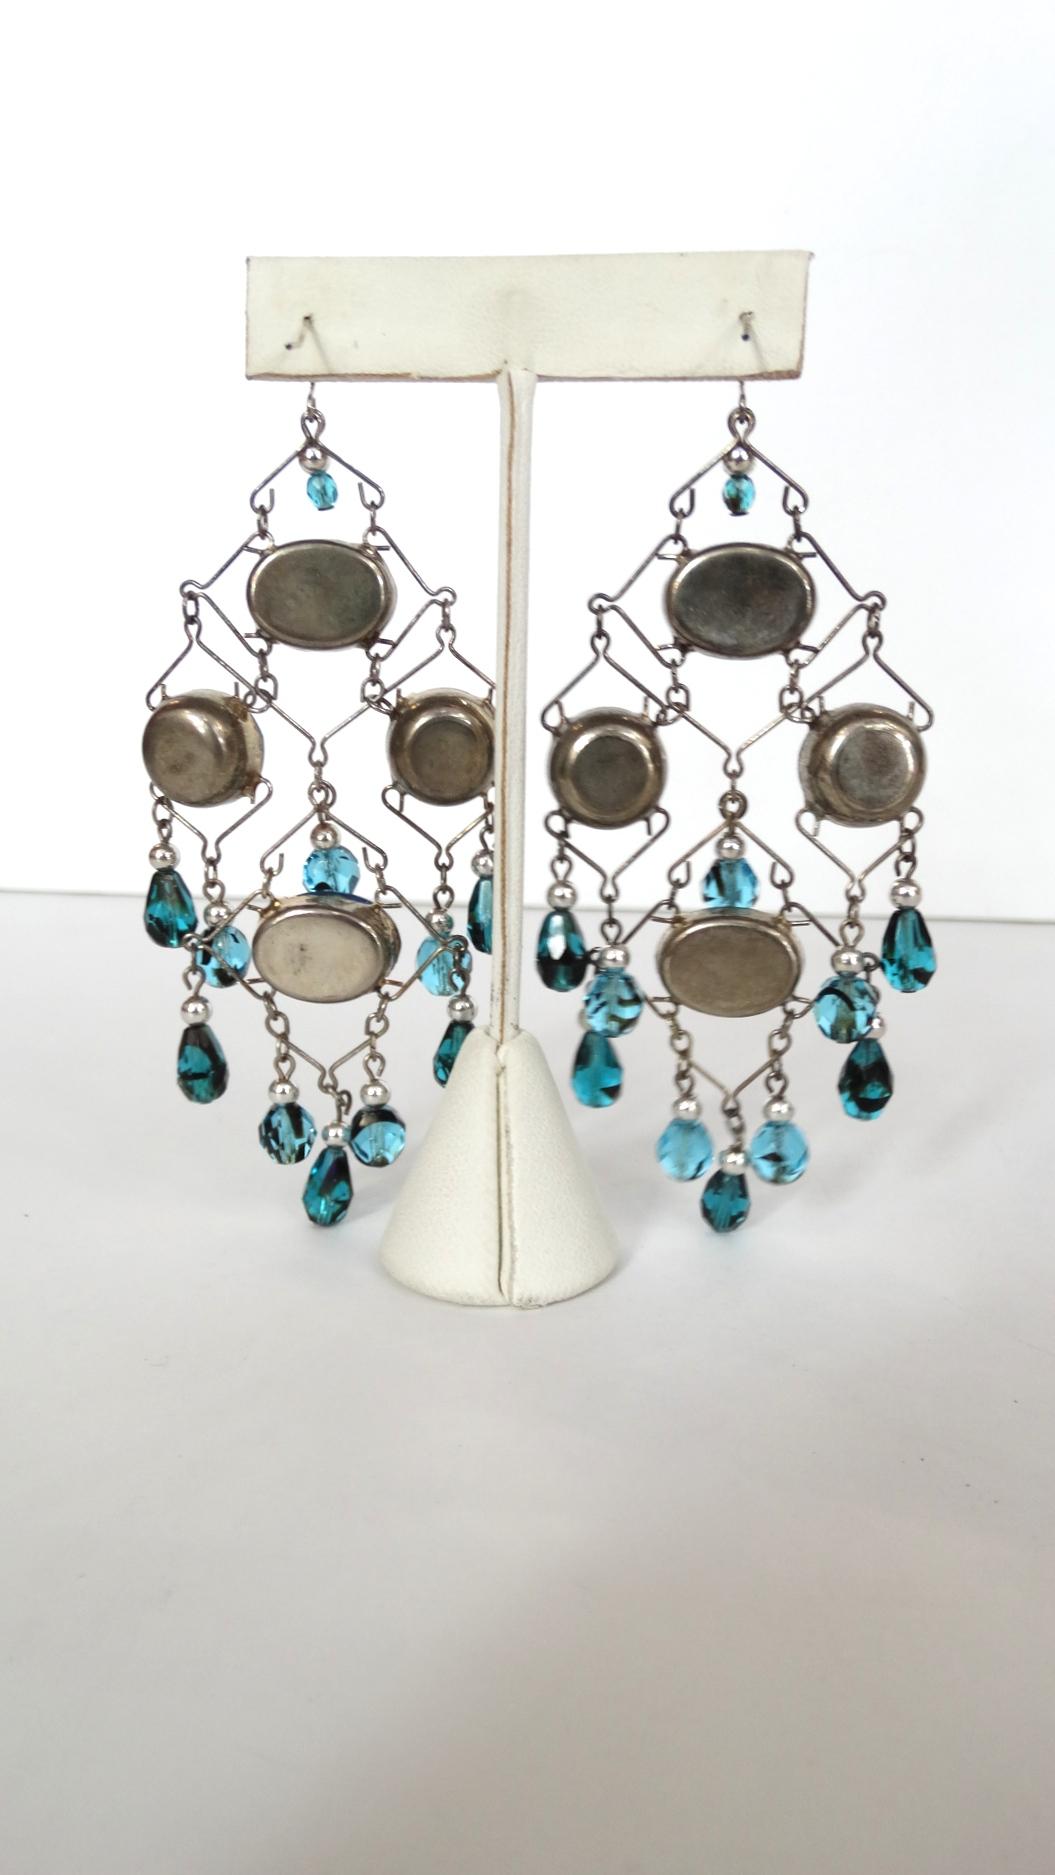 Add These Amazing Earrings To Your Collection! Circa 21st Century, these dangle earrings are constructed of a wire setting. Features faux Aquamarine gemstones and beads that hang from the base. Includes pierced fish hook backs. Drops 4 inches 